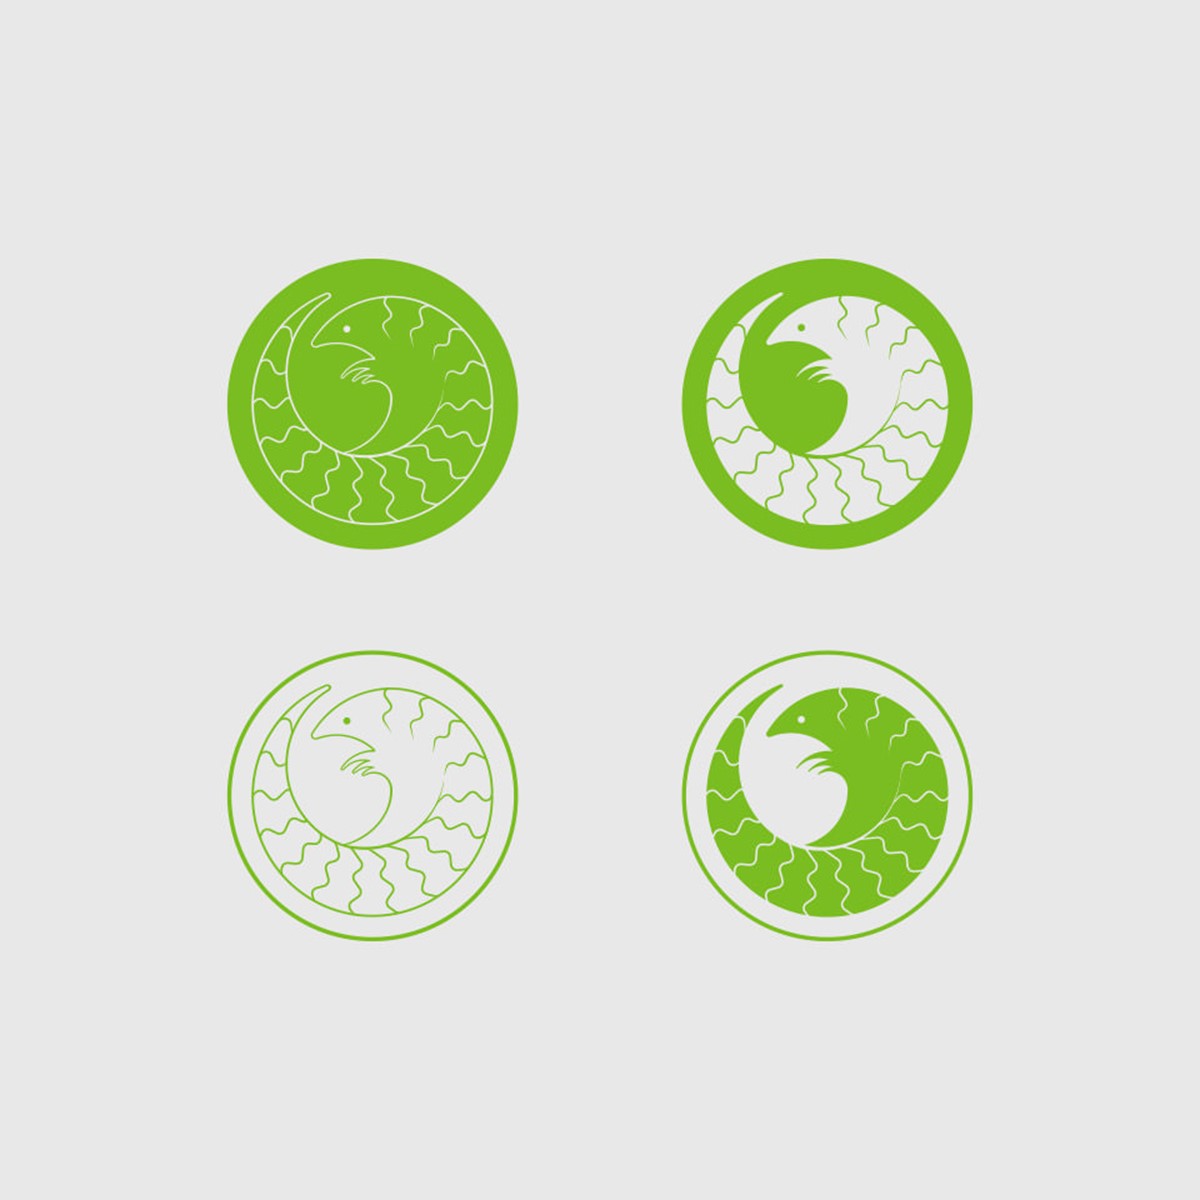 Pangolin Crisis Fund – Logo variations. Brand identity design by Superfried. 